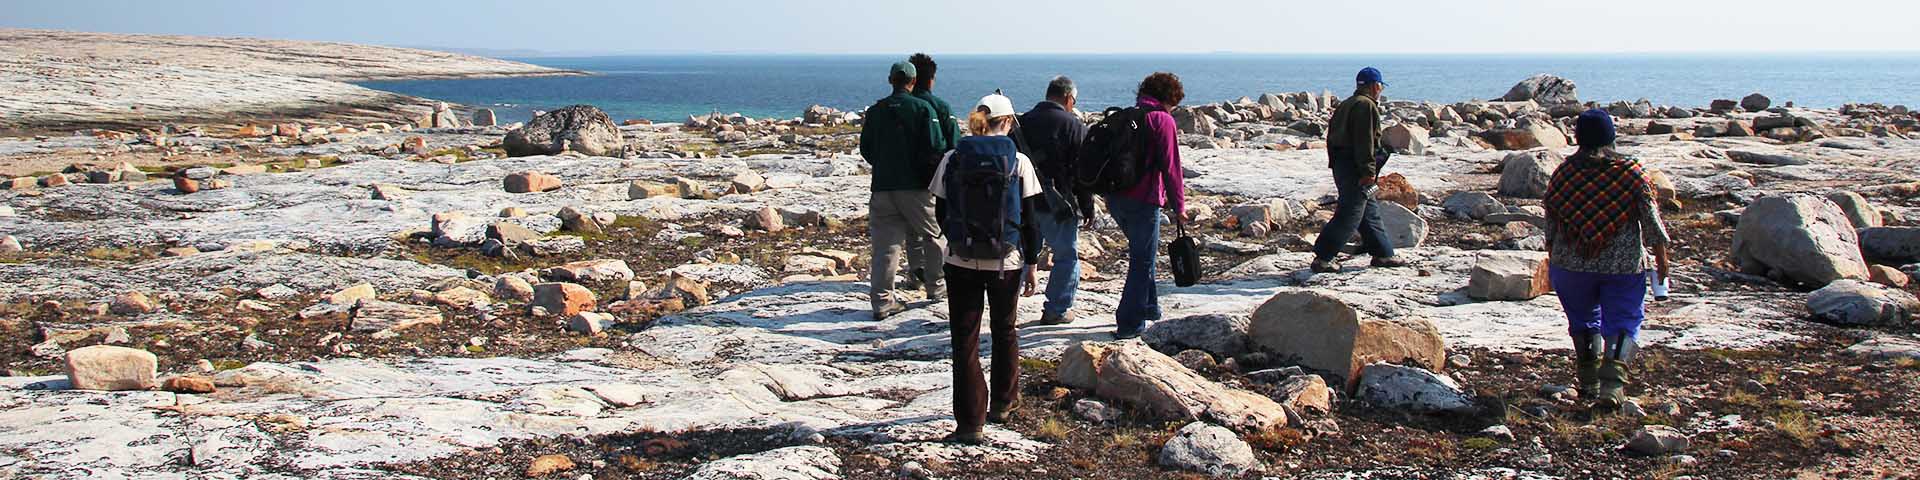 A group of people walking through a rocky tundra landscape. 